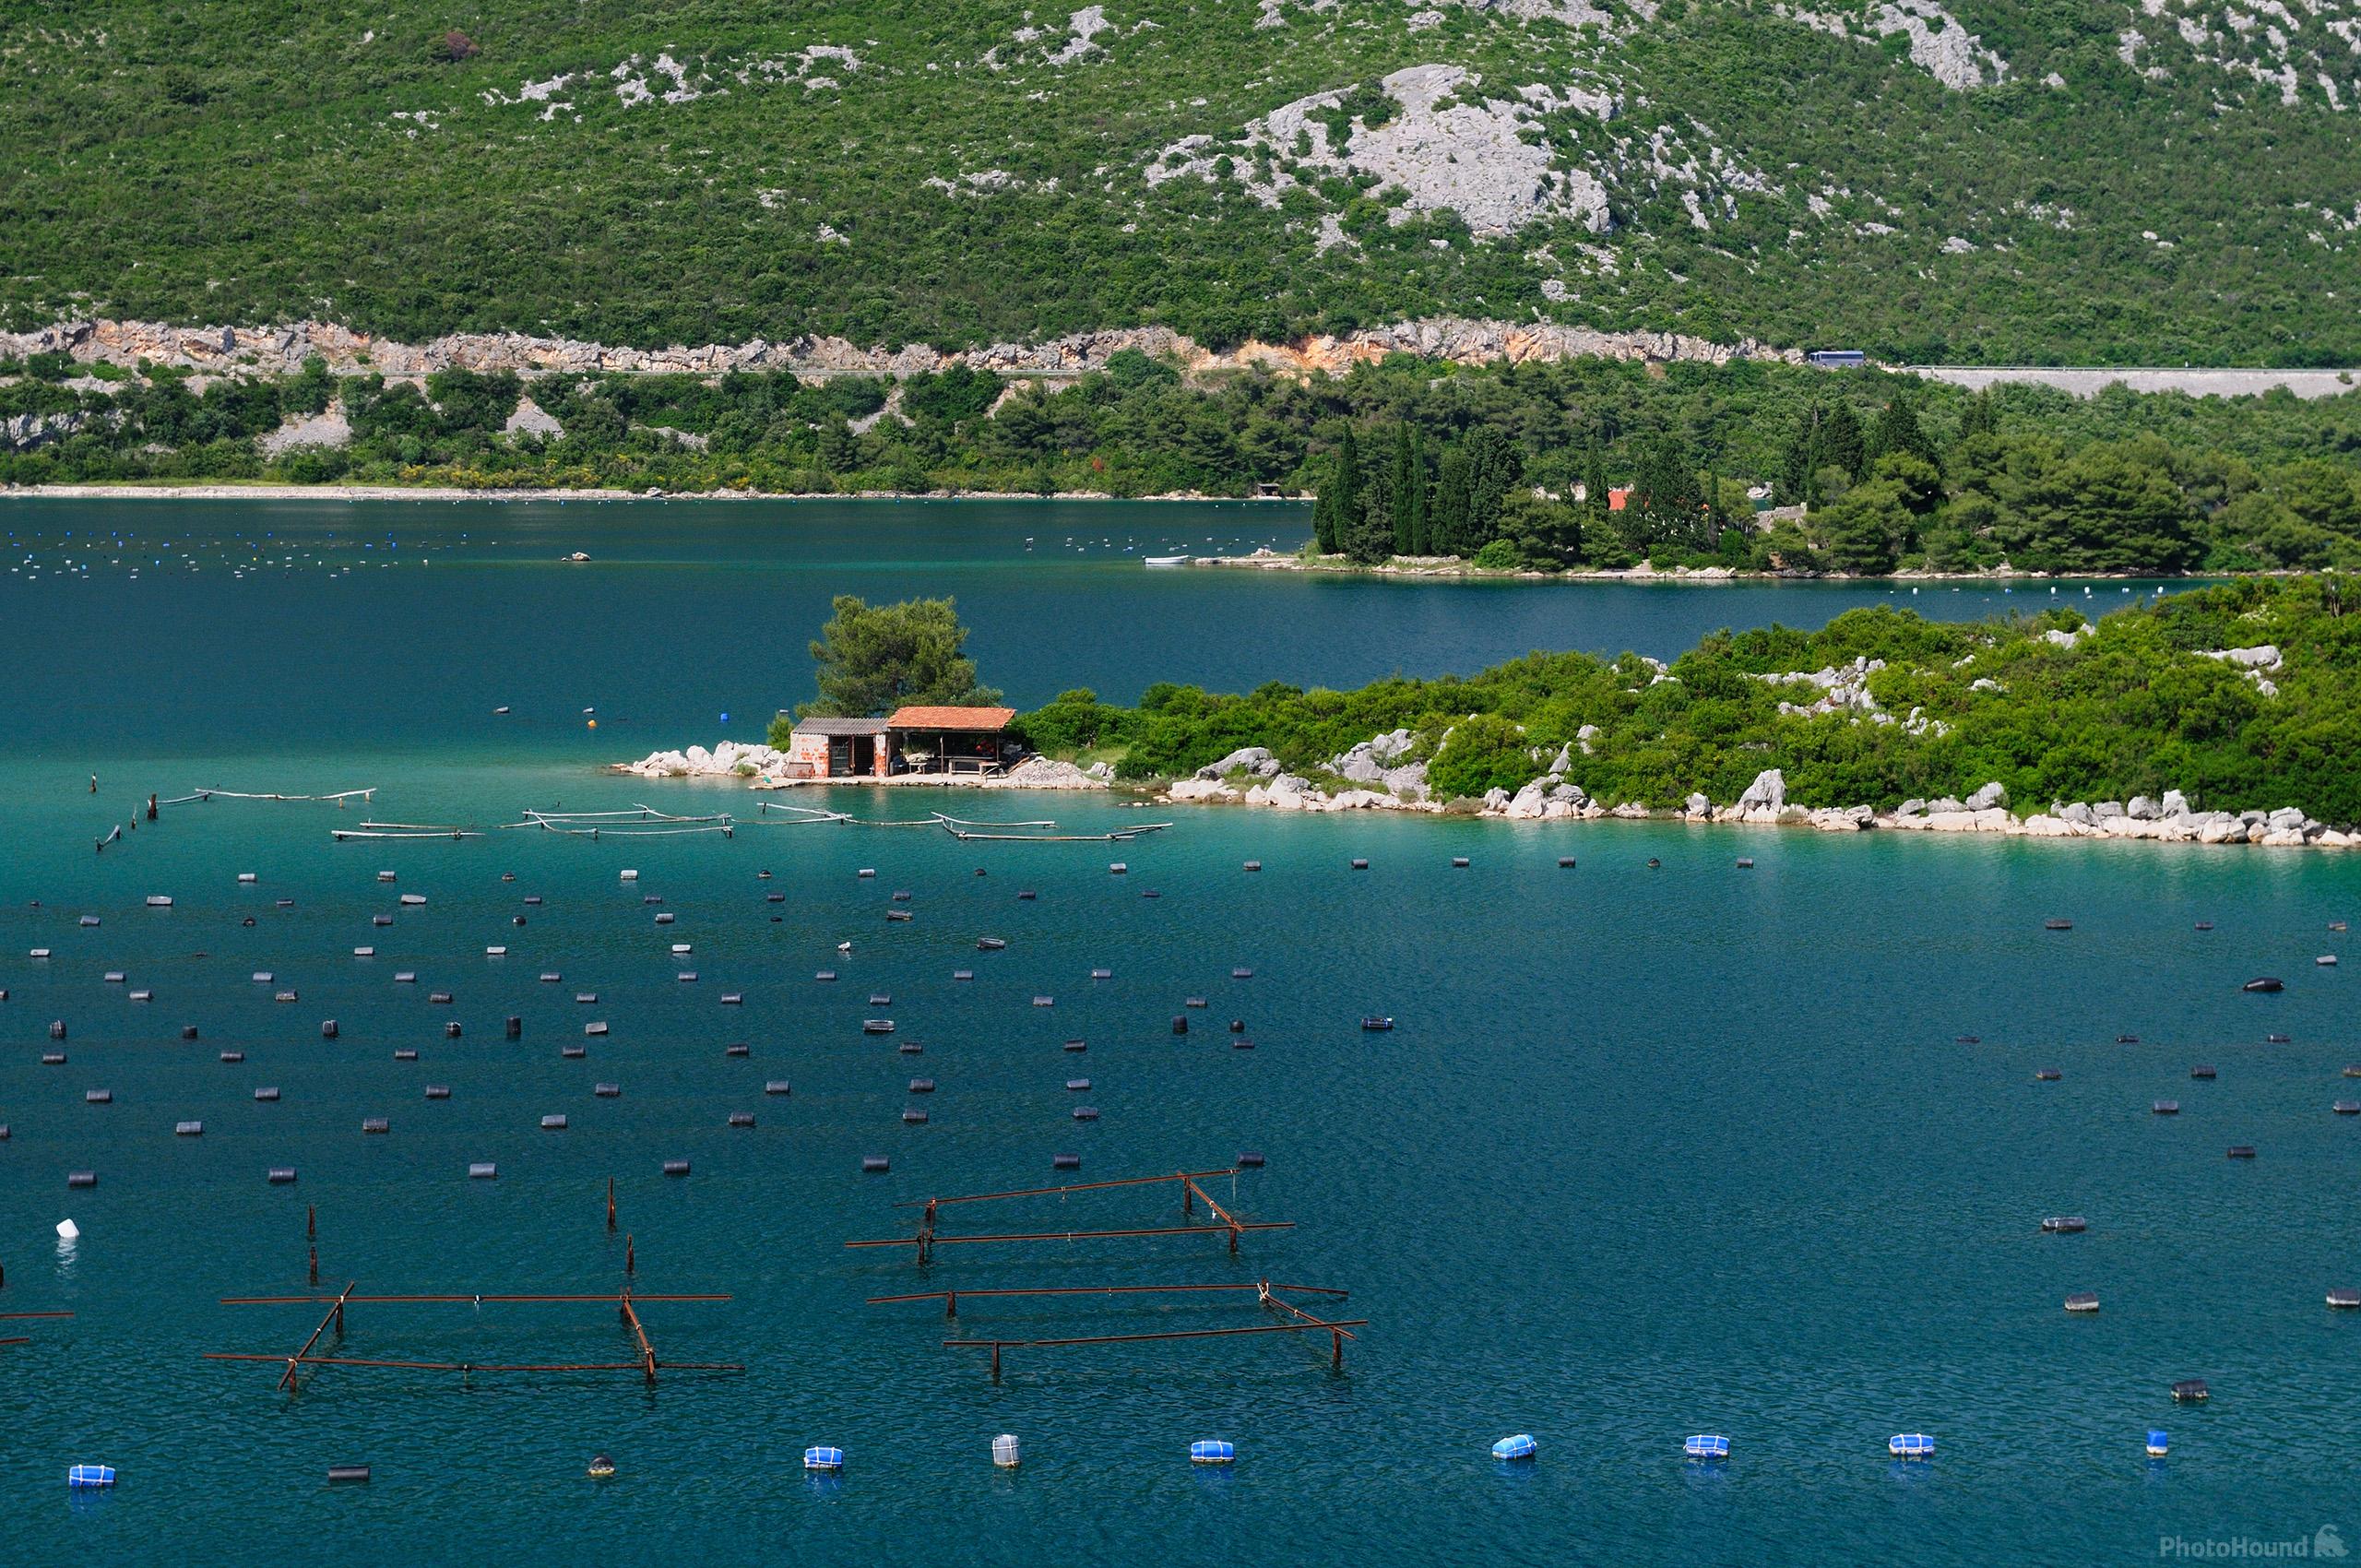 Image of Mussel Farms at Ston by Luka Esenko